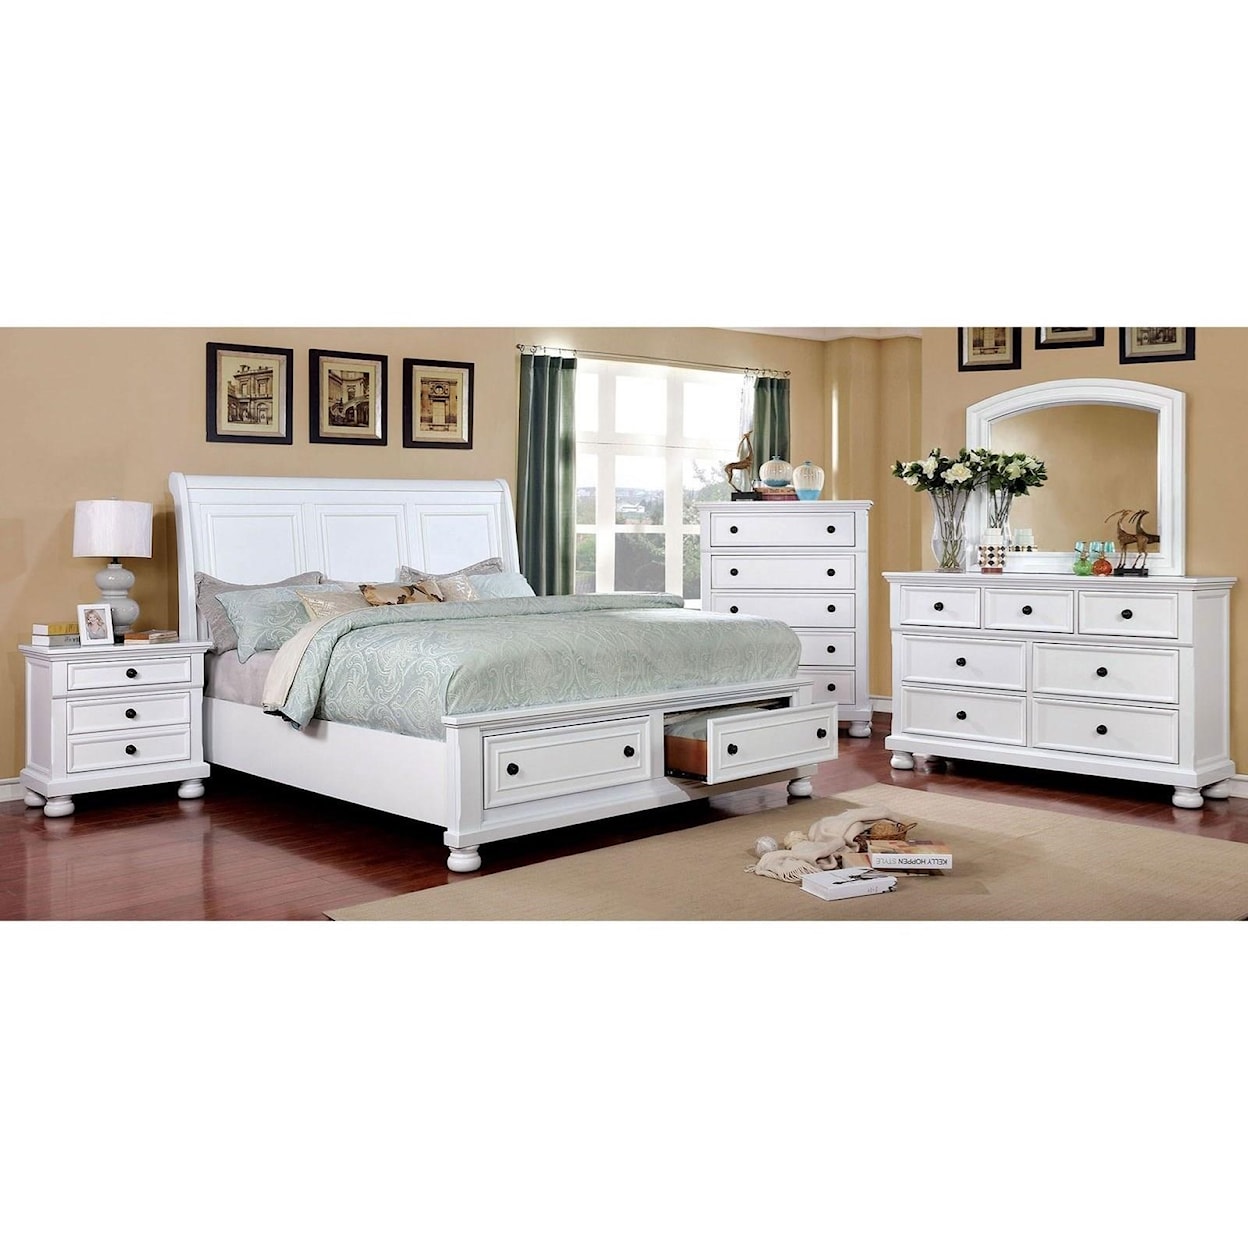 Furniture of America Castor CM7590WH-Q-BED Queen Bed | Value City ...